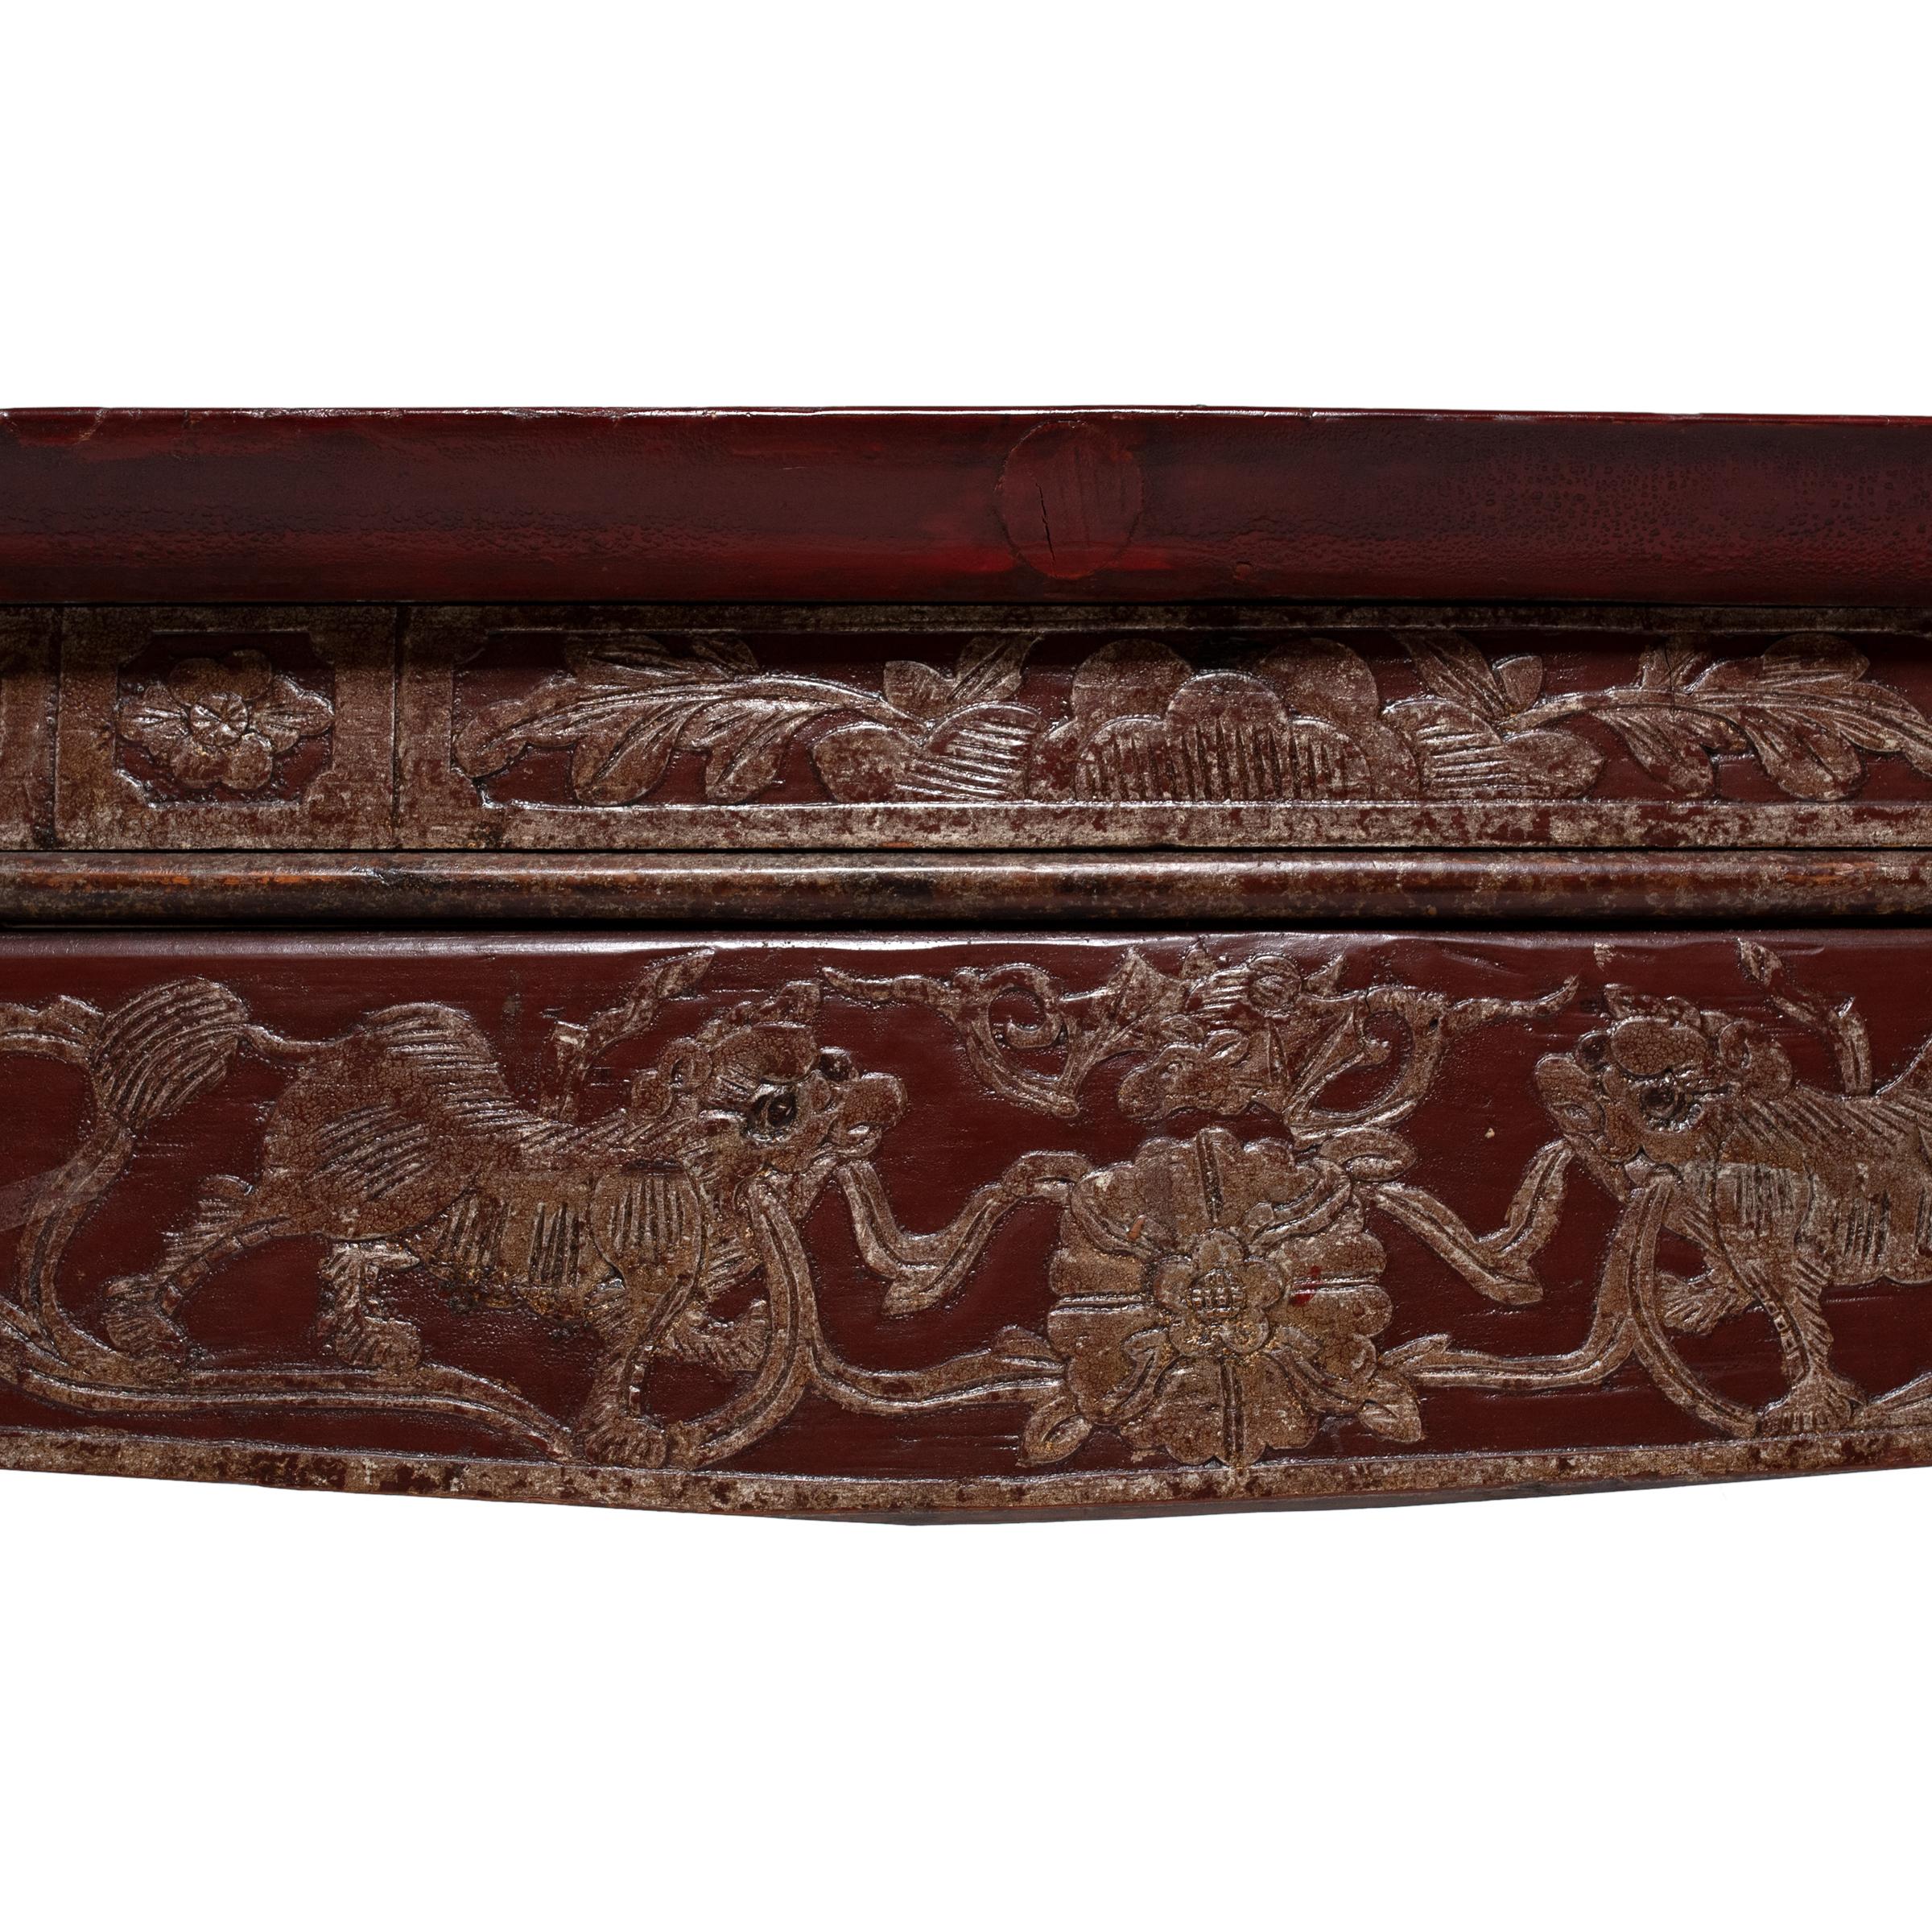 Elm Chinese Lacquered Theater Bench with Dragon Carvings, c. 1850 For Sale